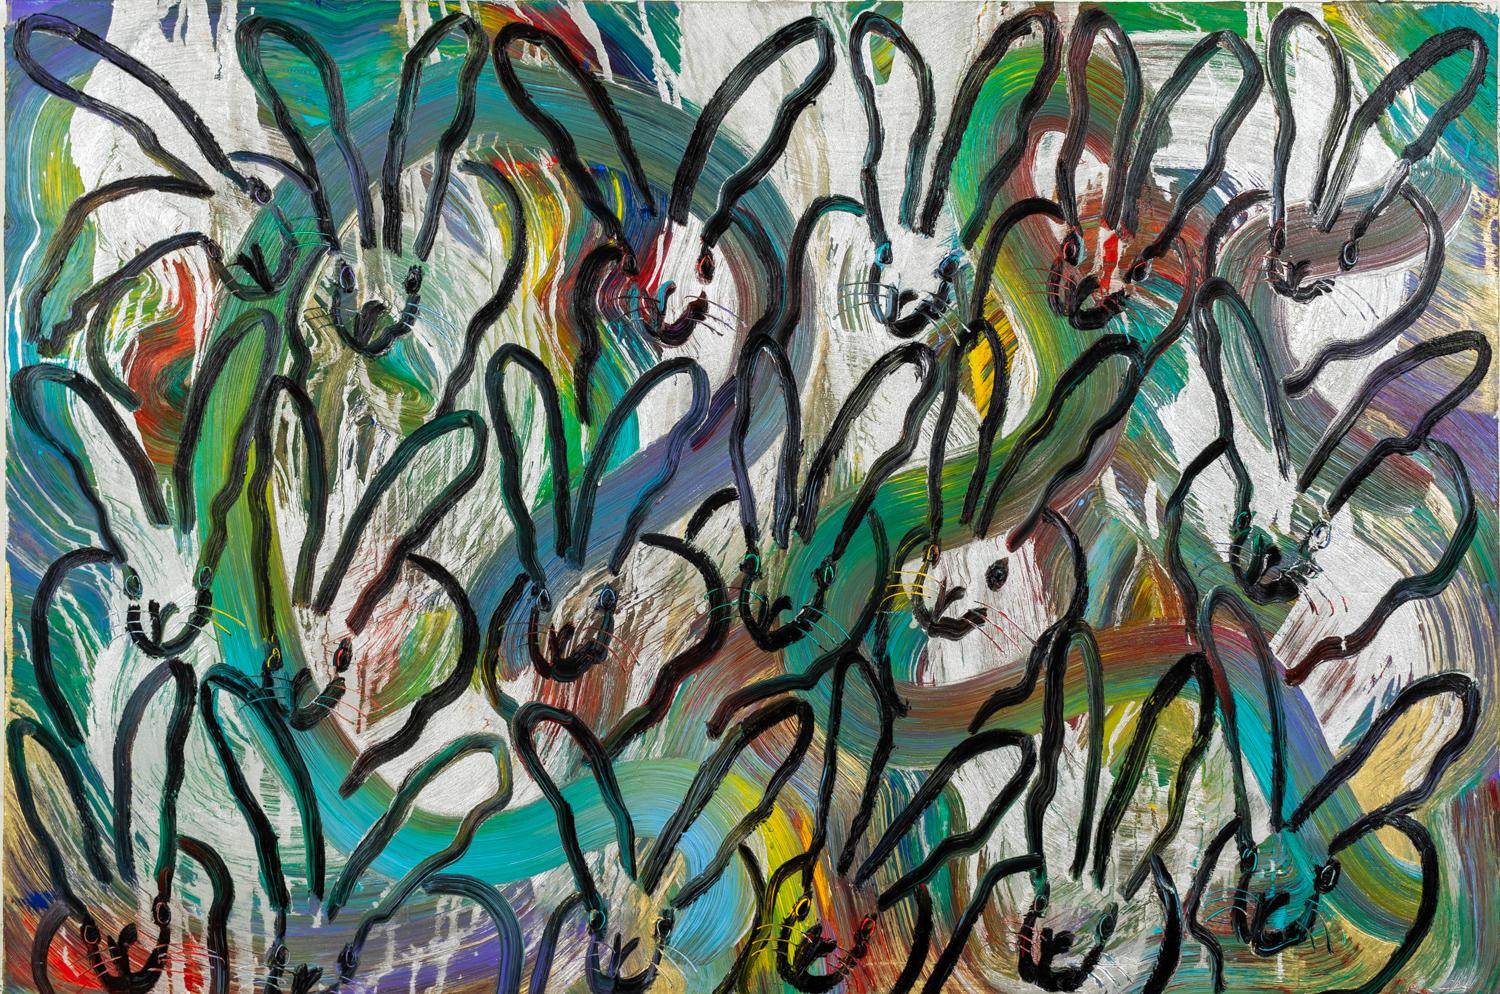 'Belle Terre Totem' by Hunt Slonem, 2021. Oil on canvas, 40 x 60 in. This painting features Slonem's signature bunnies outlined in black over swirling strokes of silver, green, red, yellow, and blue.

Slonem's new series 'Totems’, an evolution of